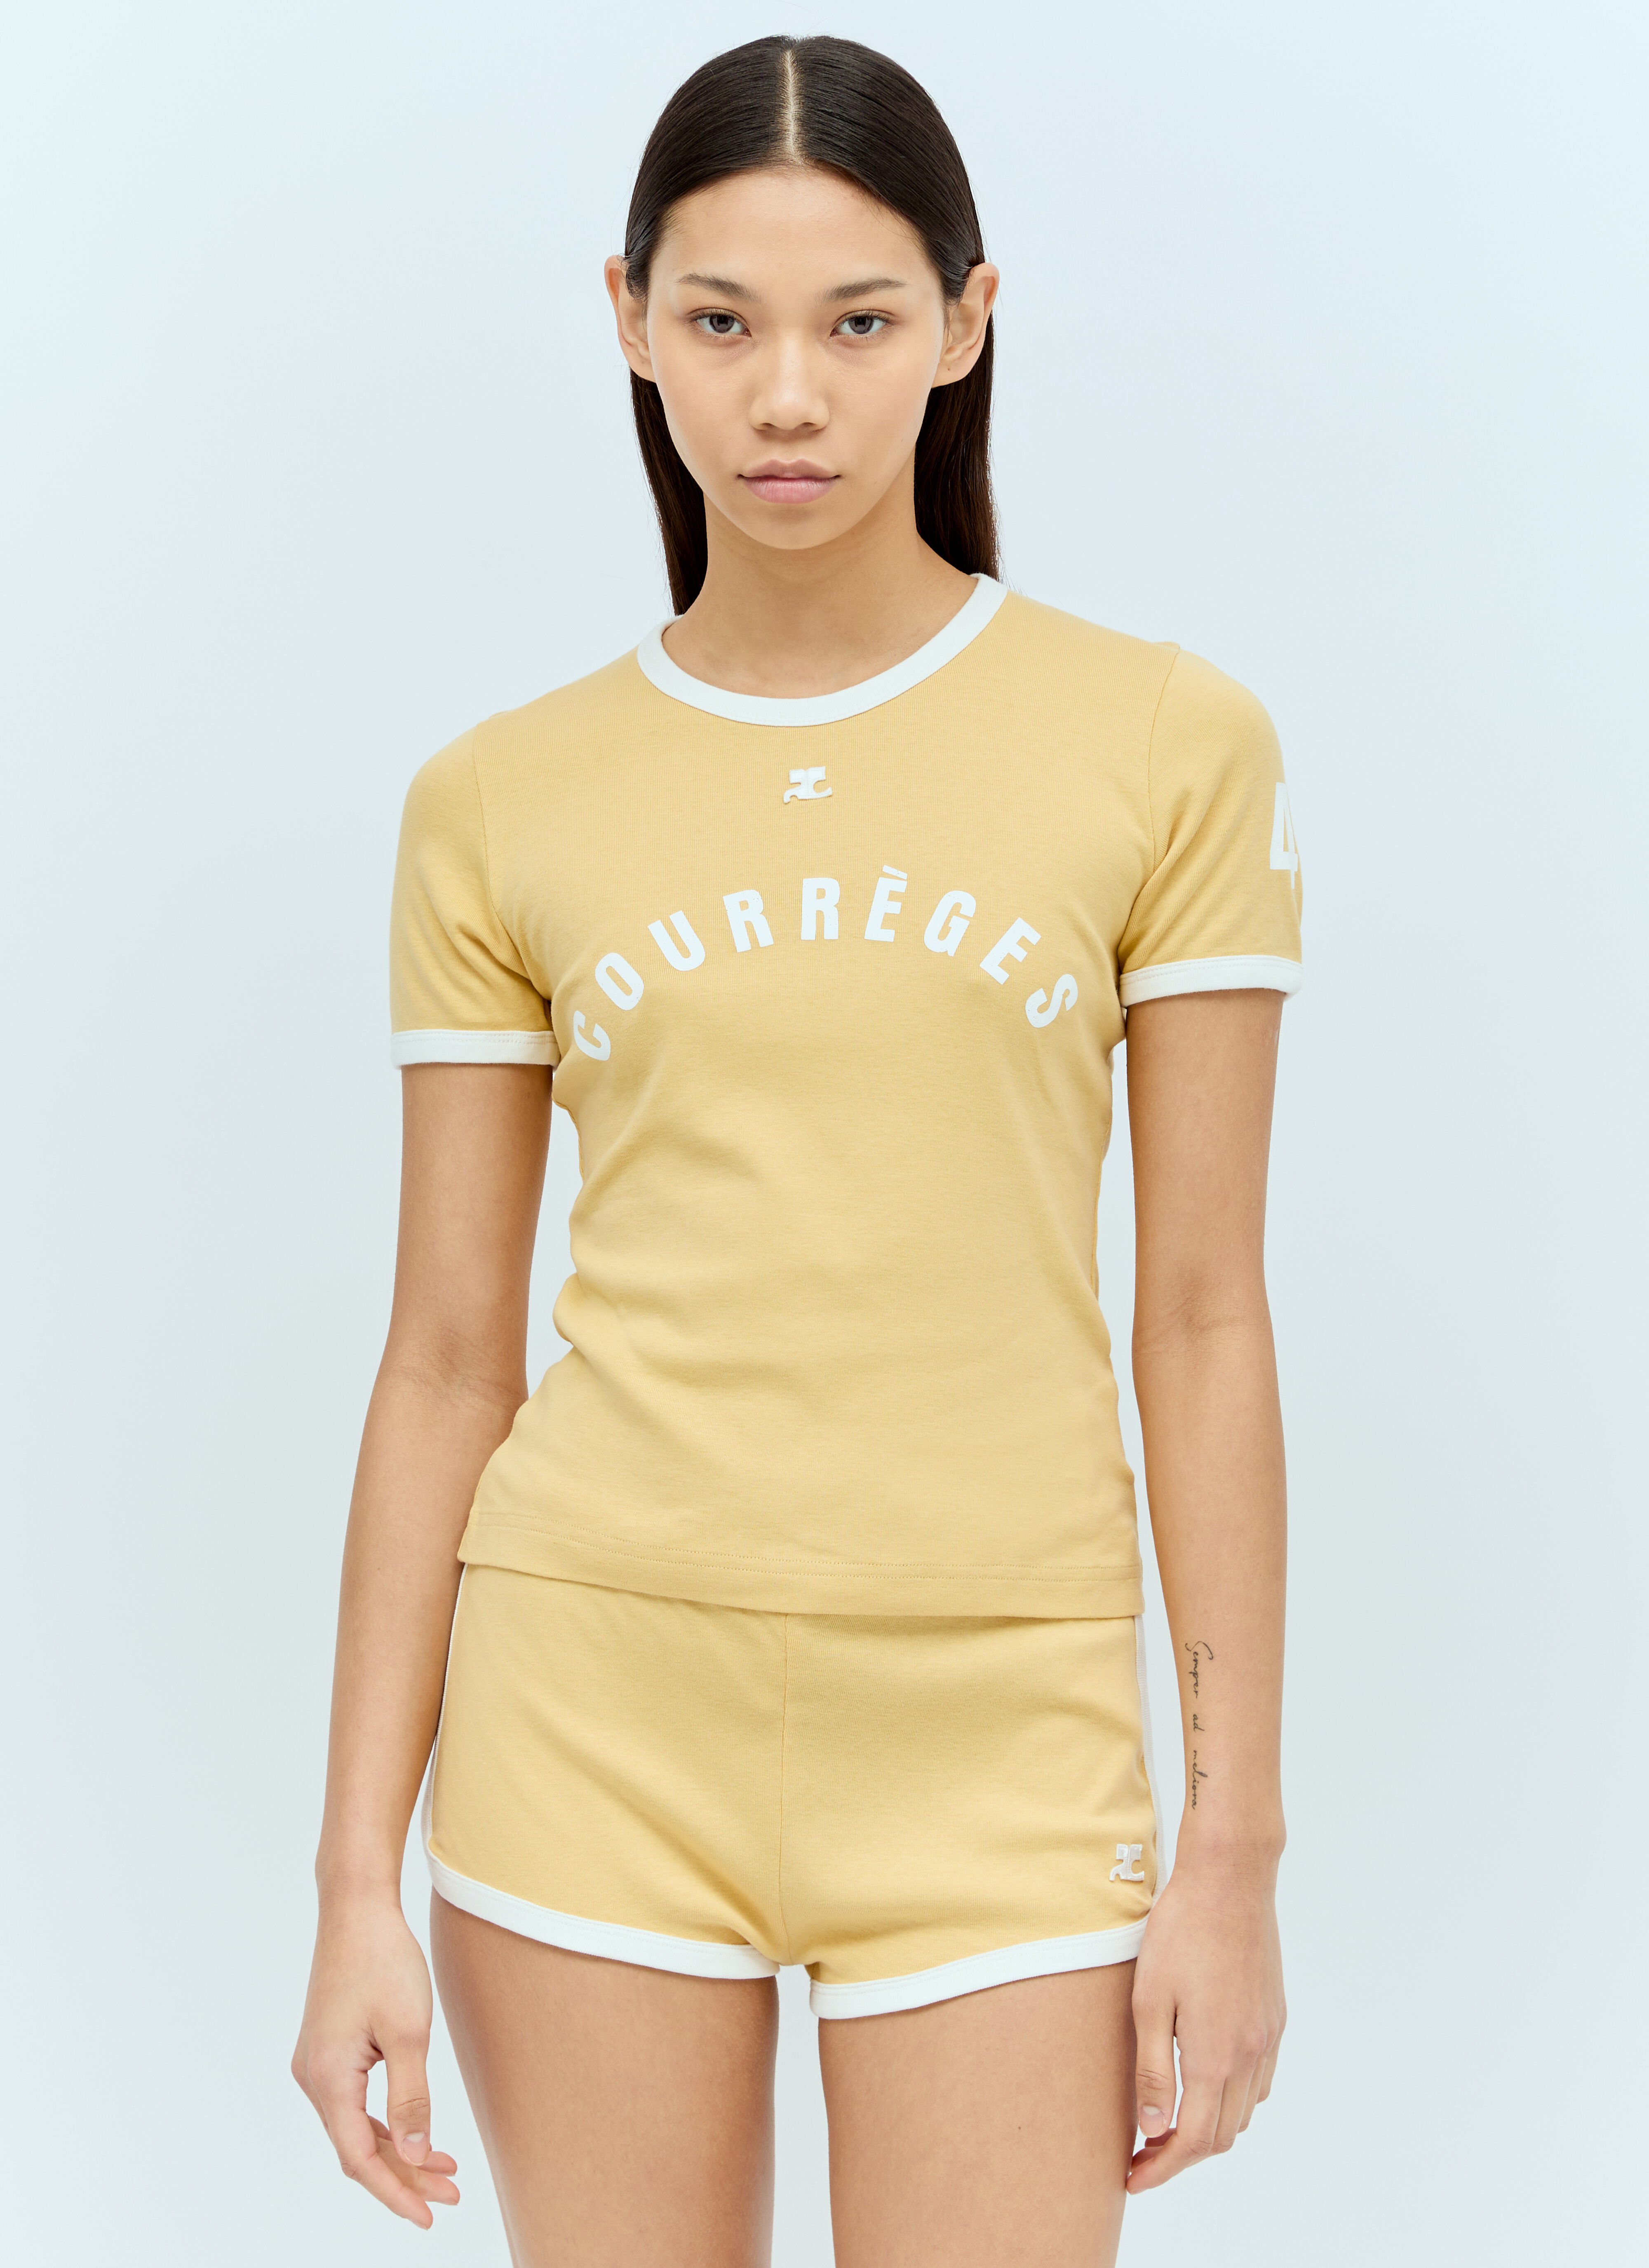 Courrèges コントラスト プリントTシャツ ブルー cou0255005